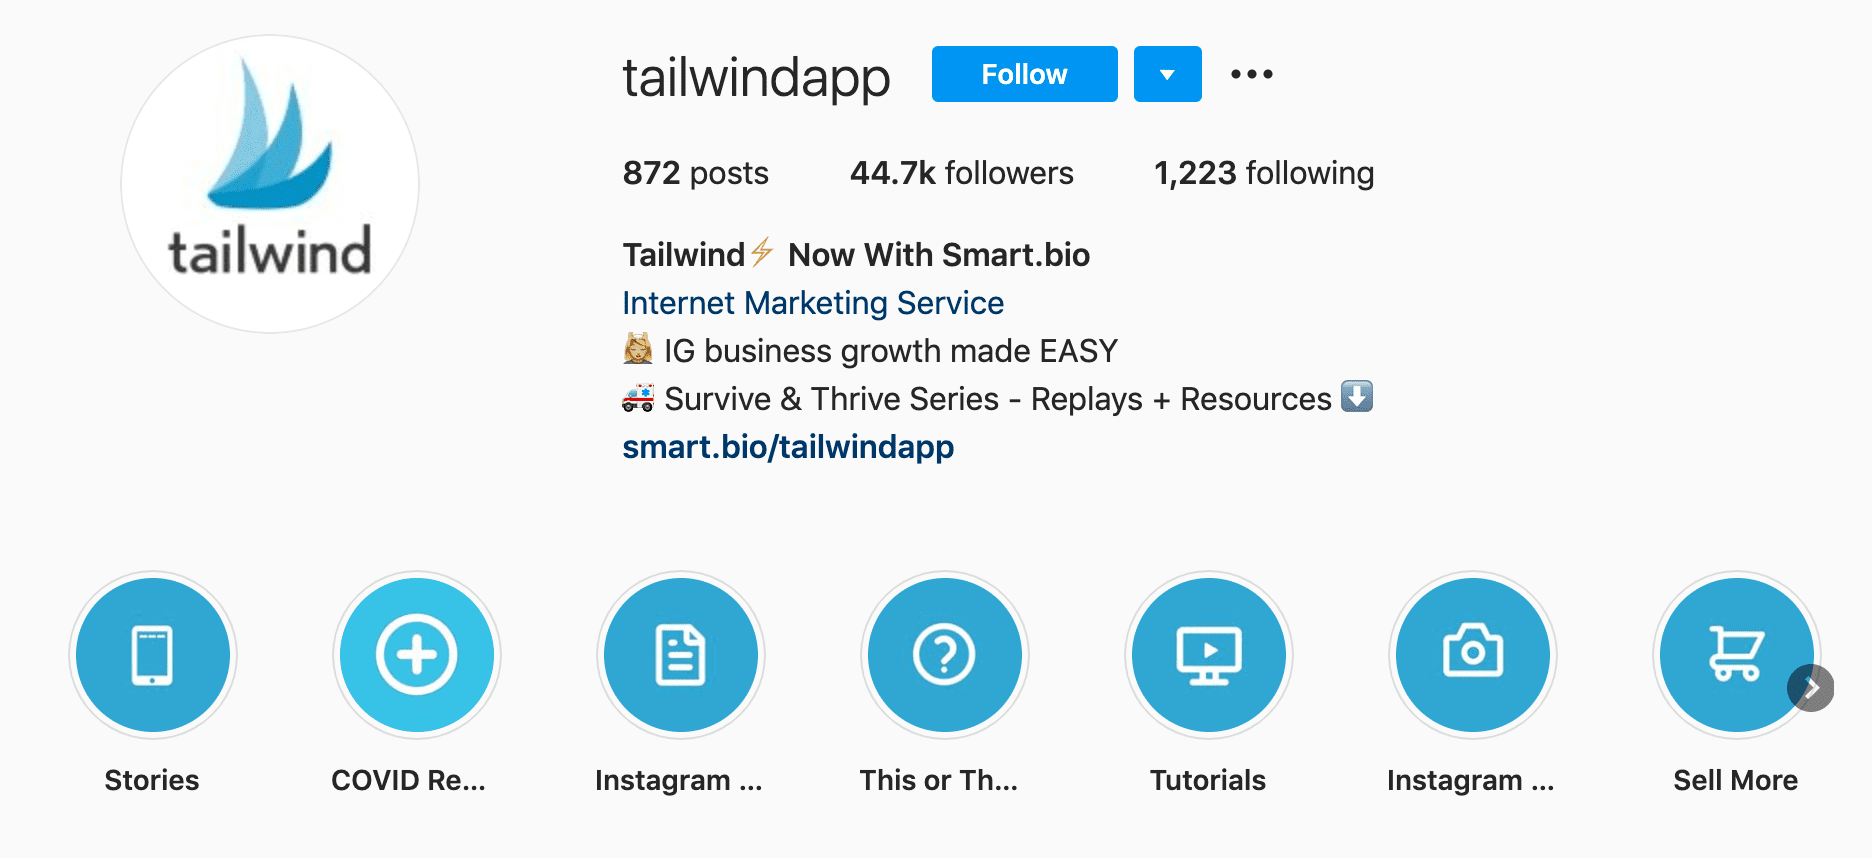 screenshot showing the Stories highlights on the Tailwind Instagram page